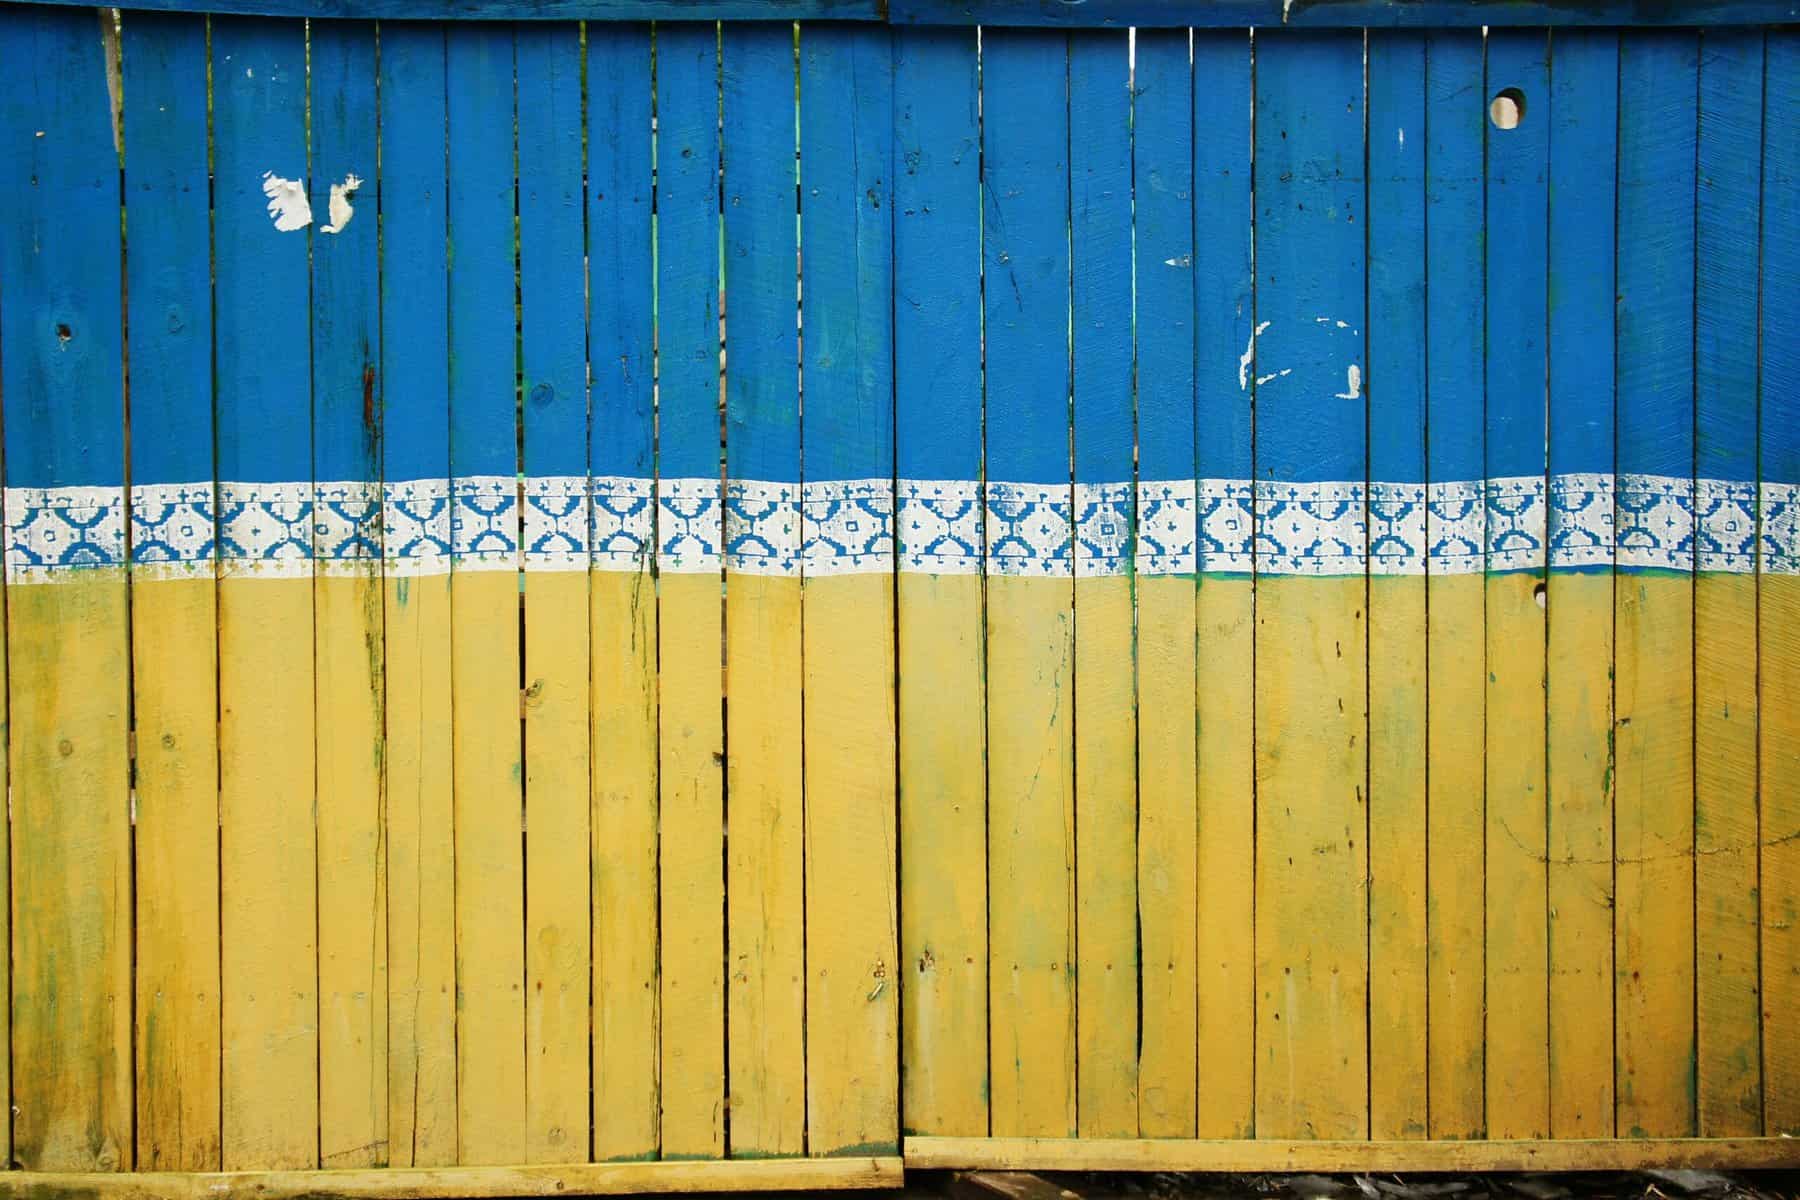 The colors of the Ukraine flag are painted across wooden fence boards.